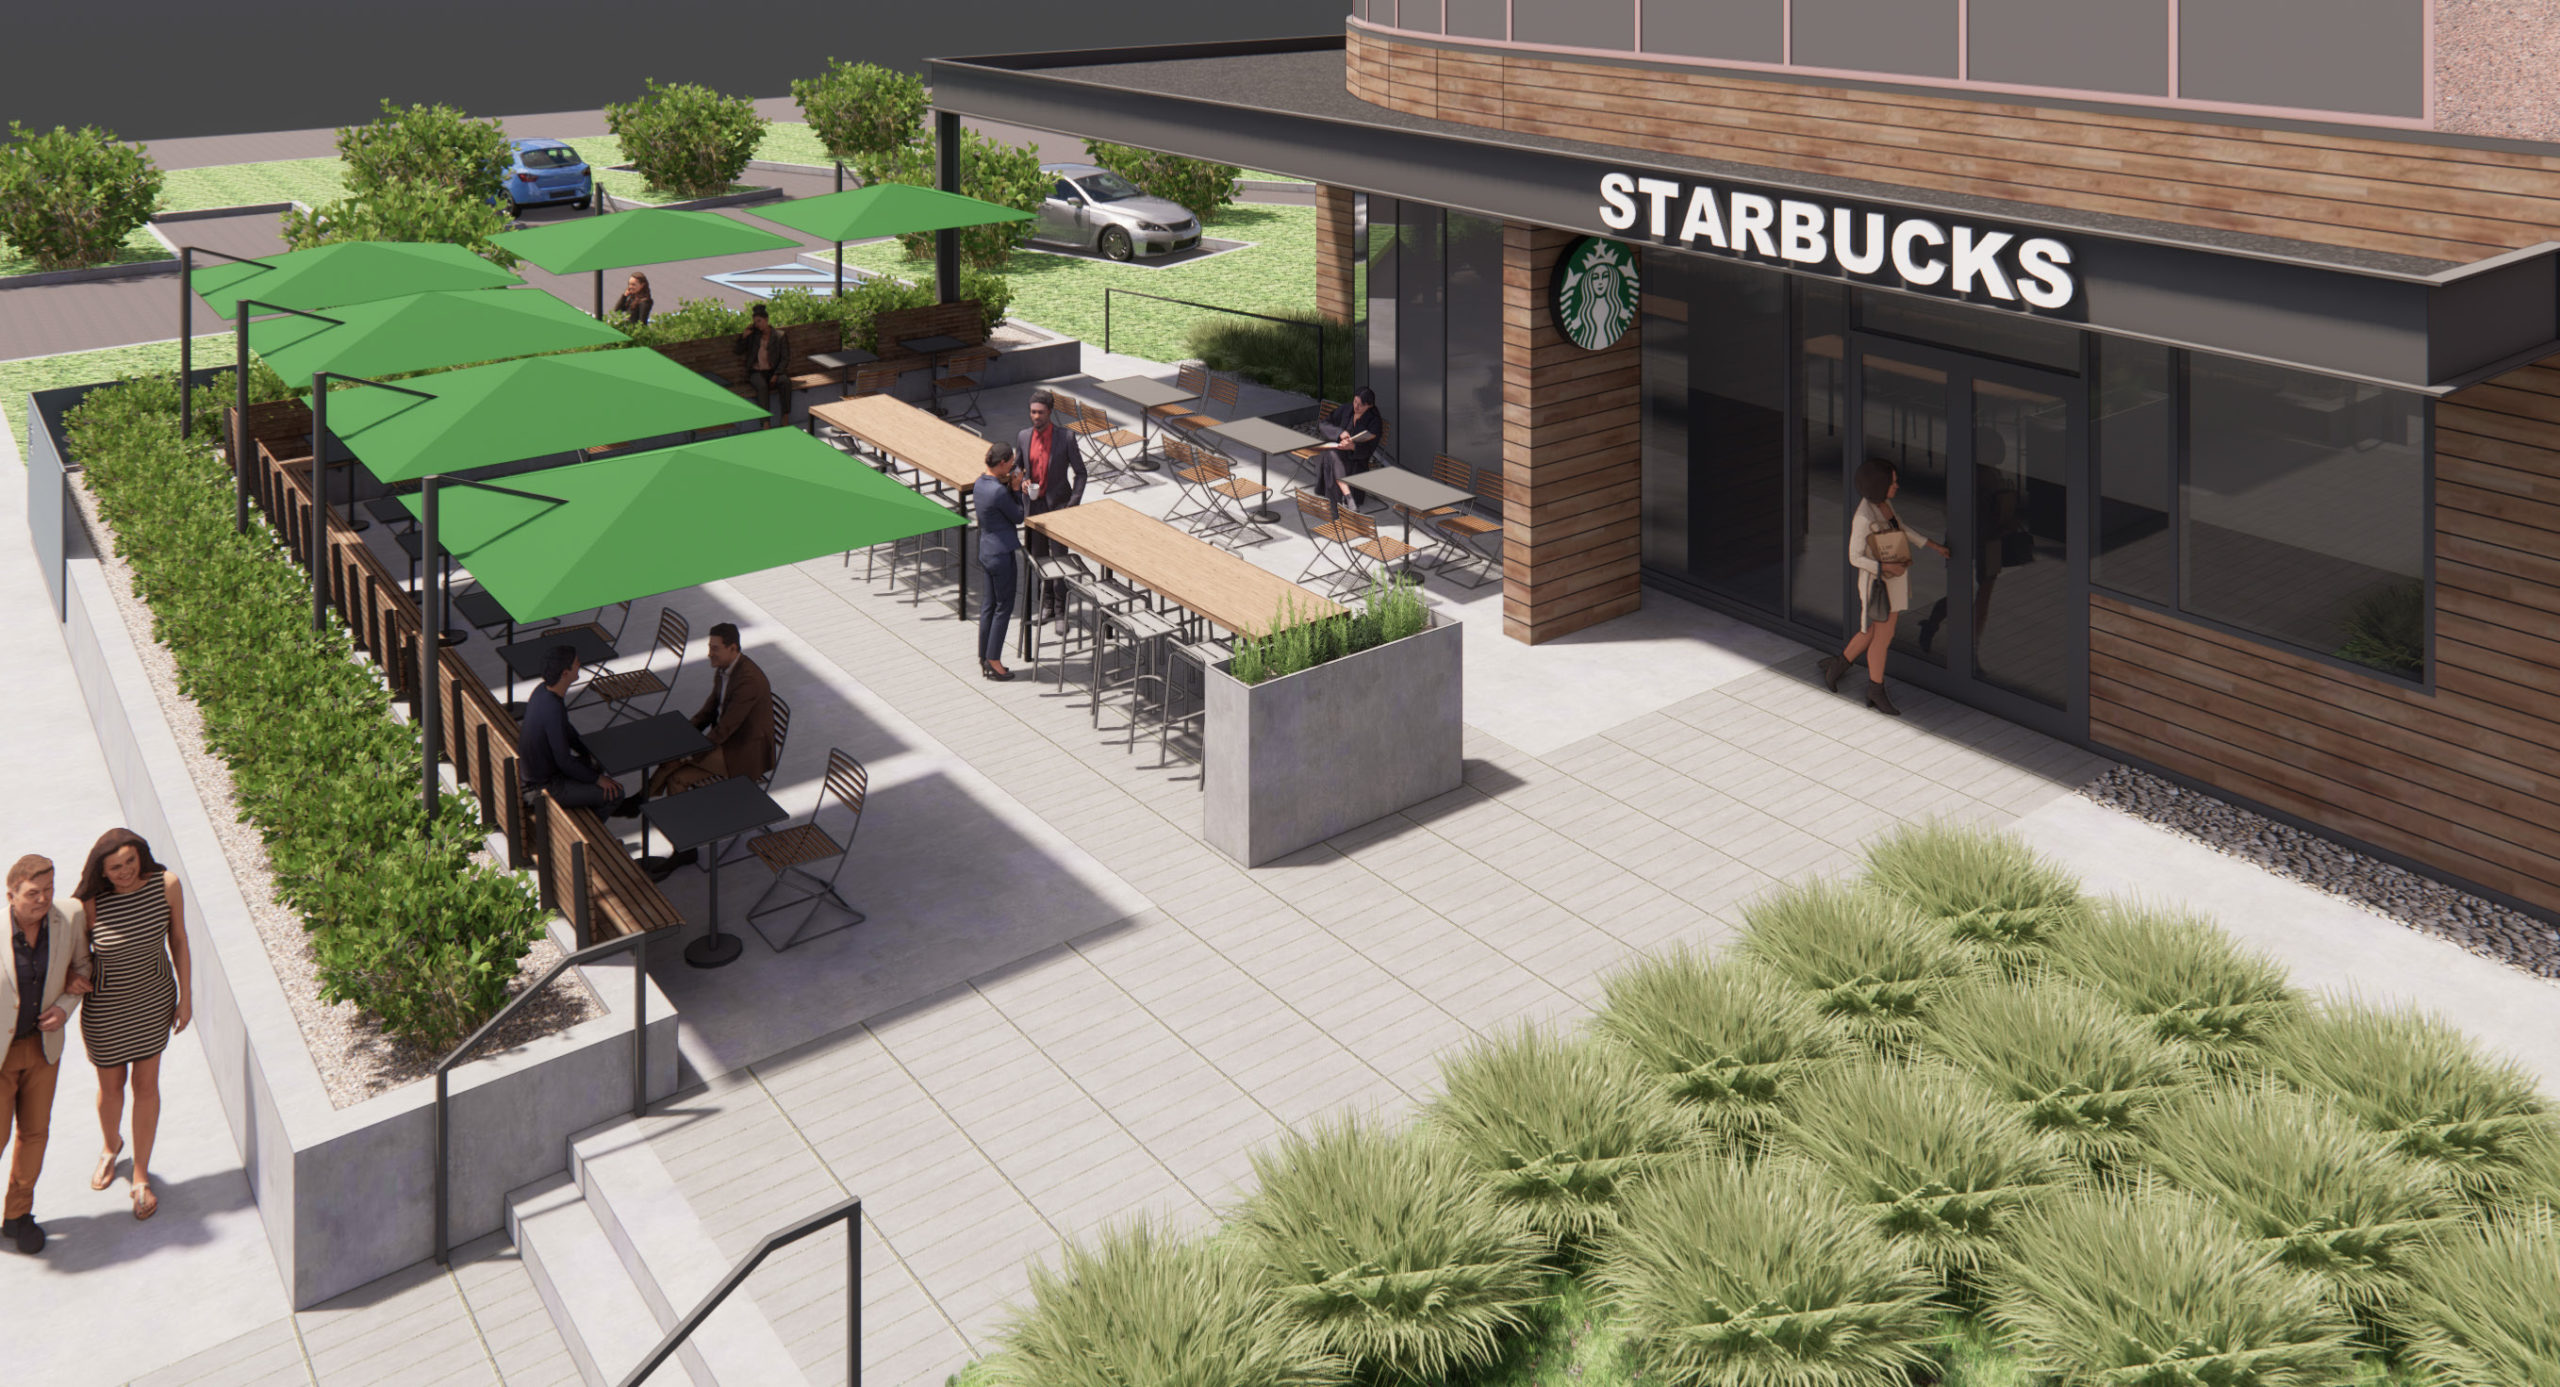 Brand-New Starbucks Opening in Galleria as Part of Office Complex